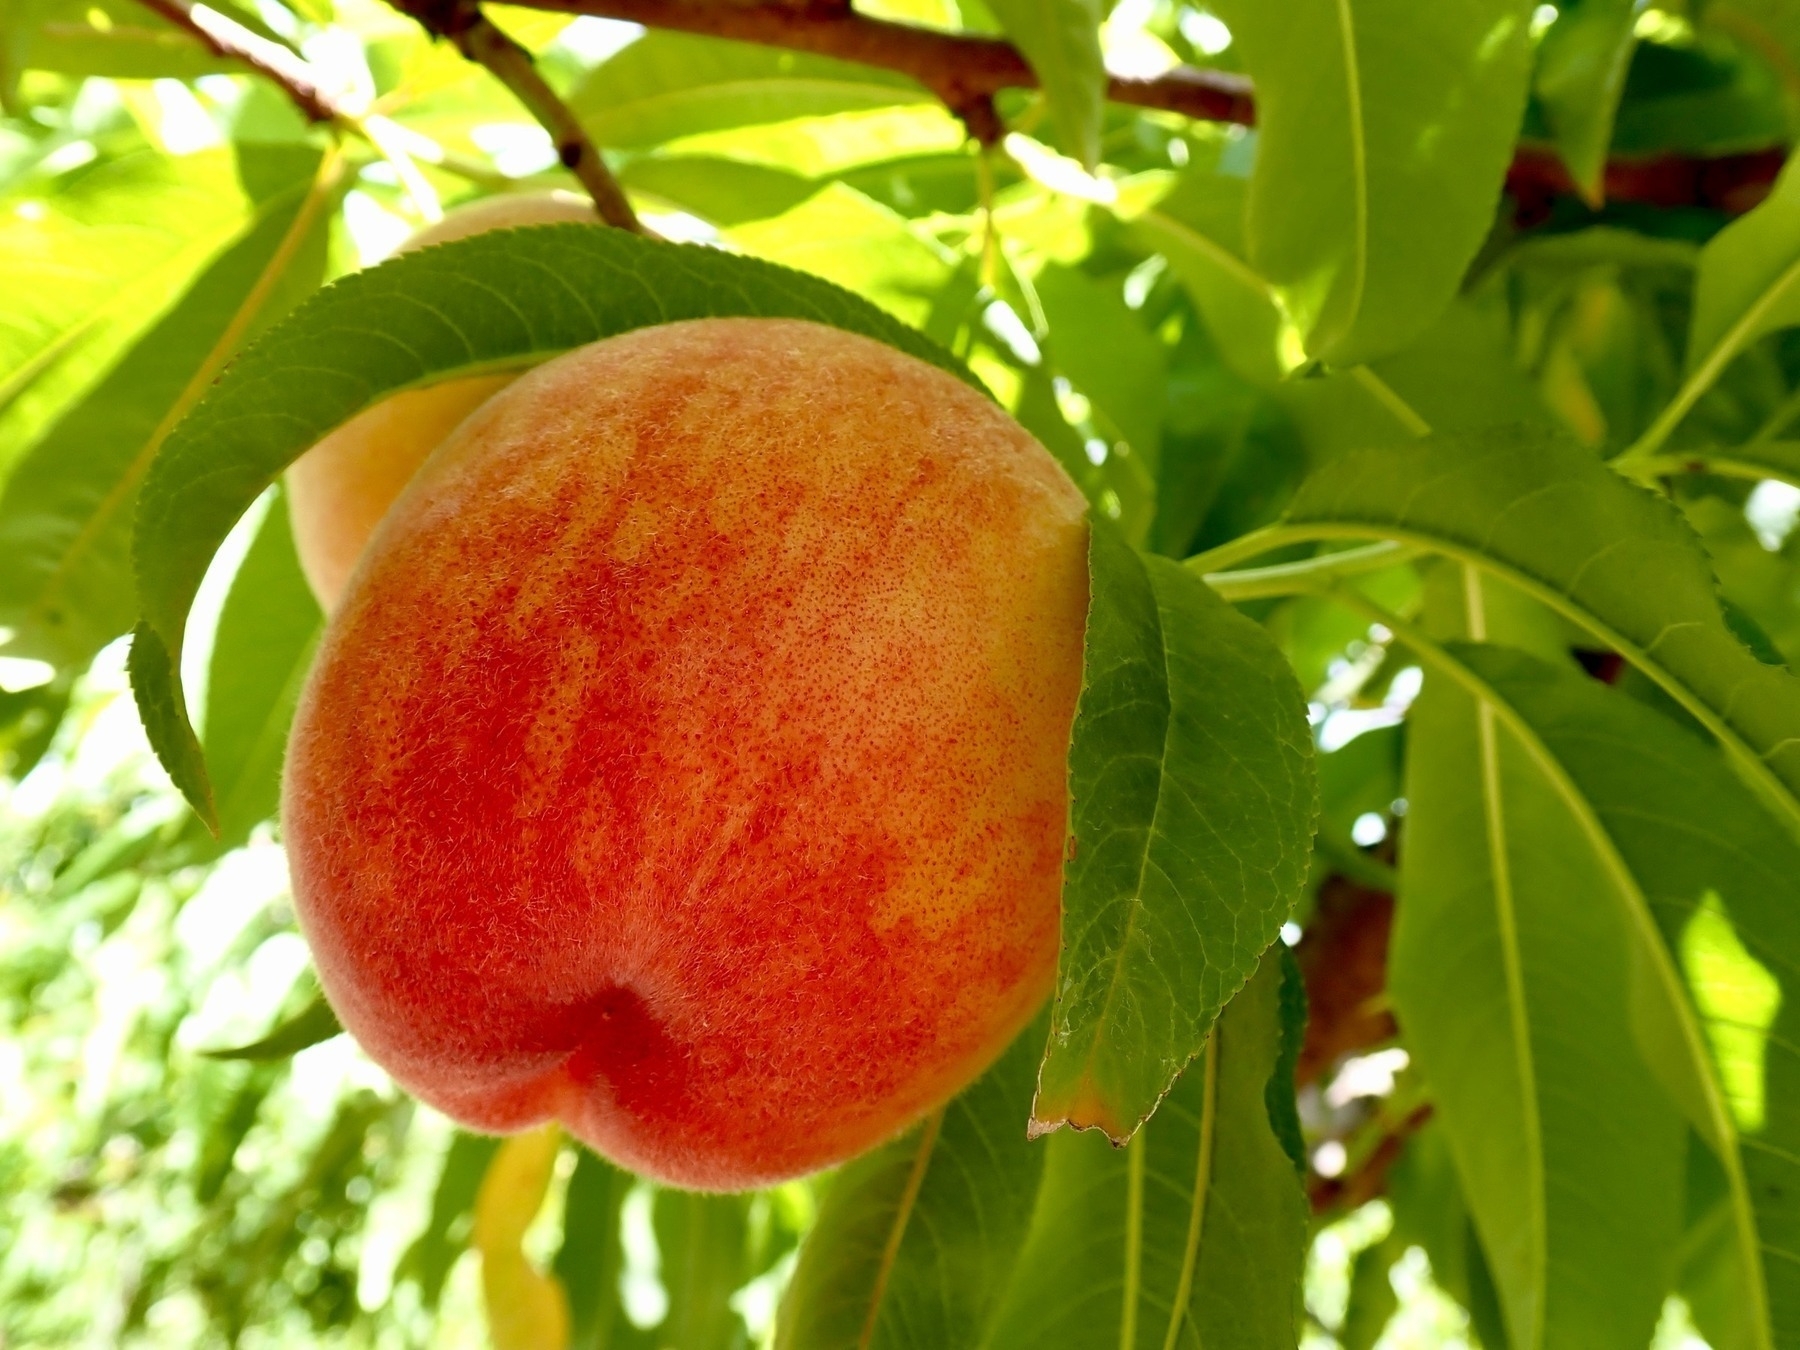 A close-up of a peach hanging in a tree